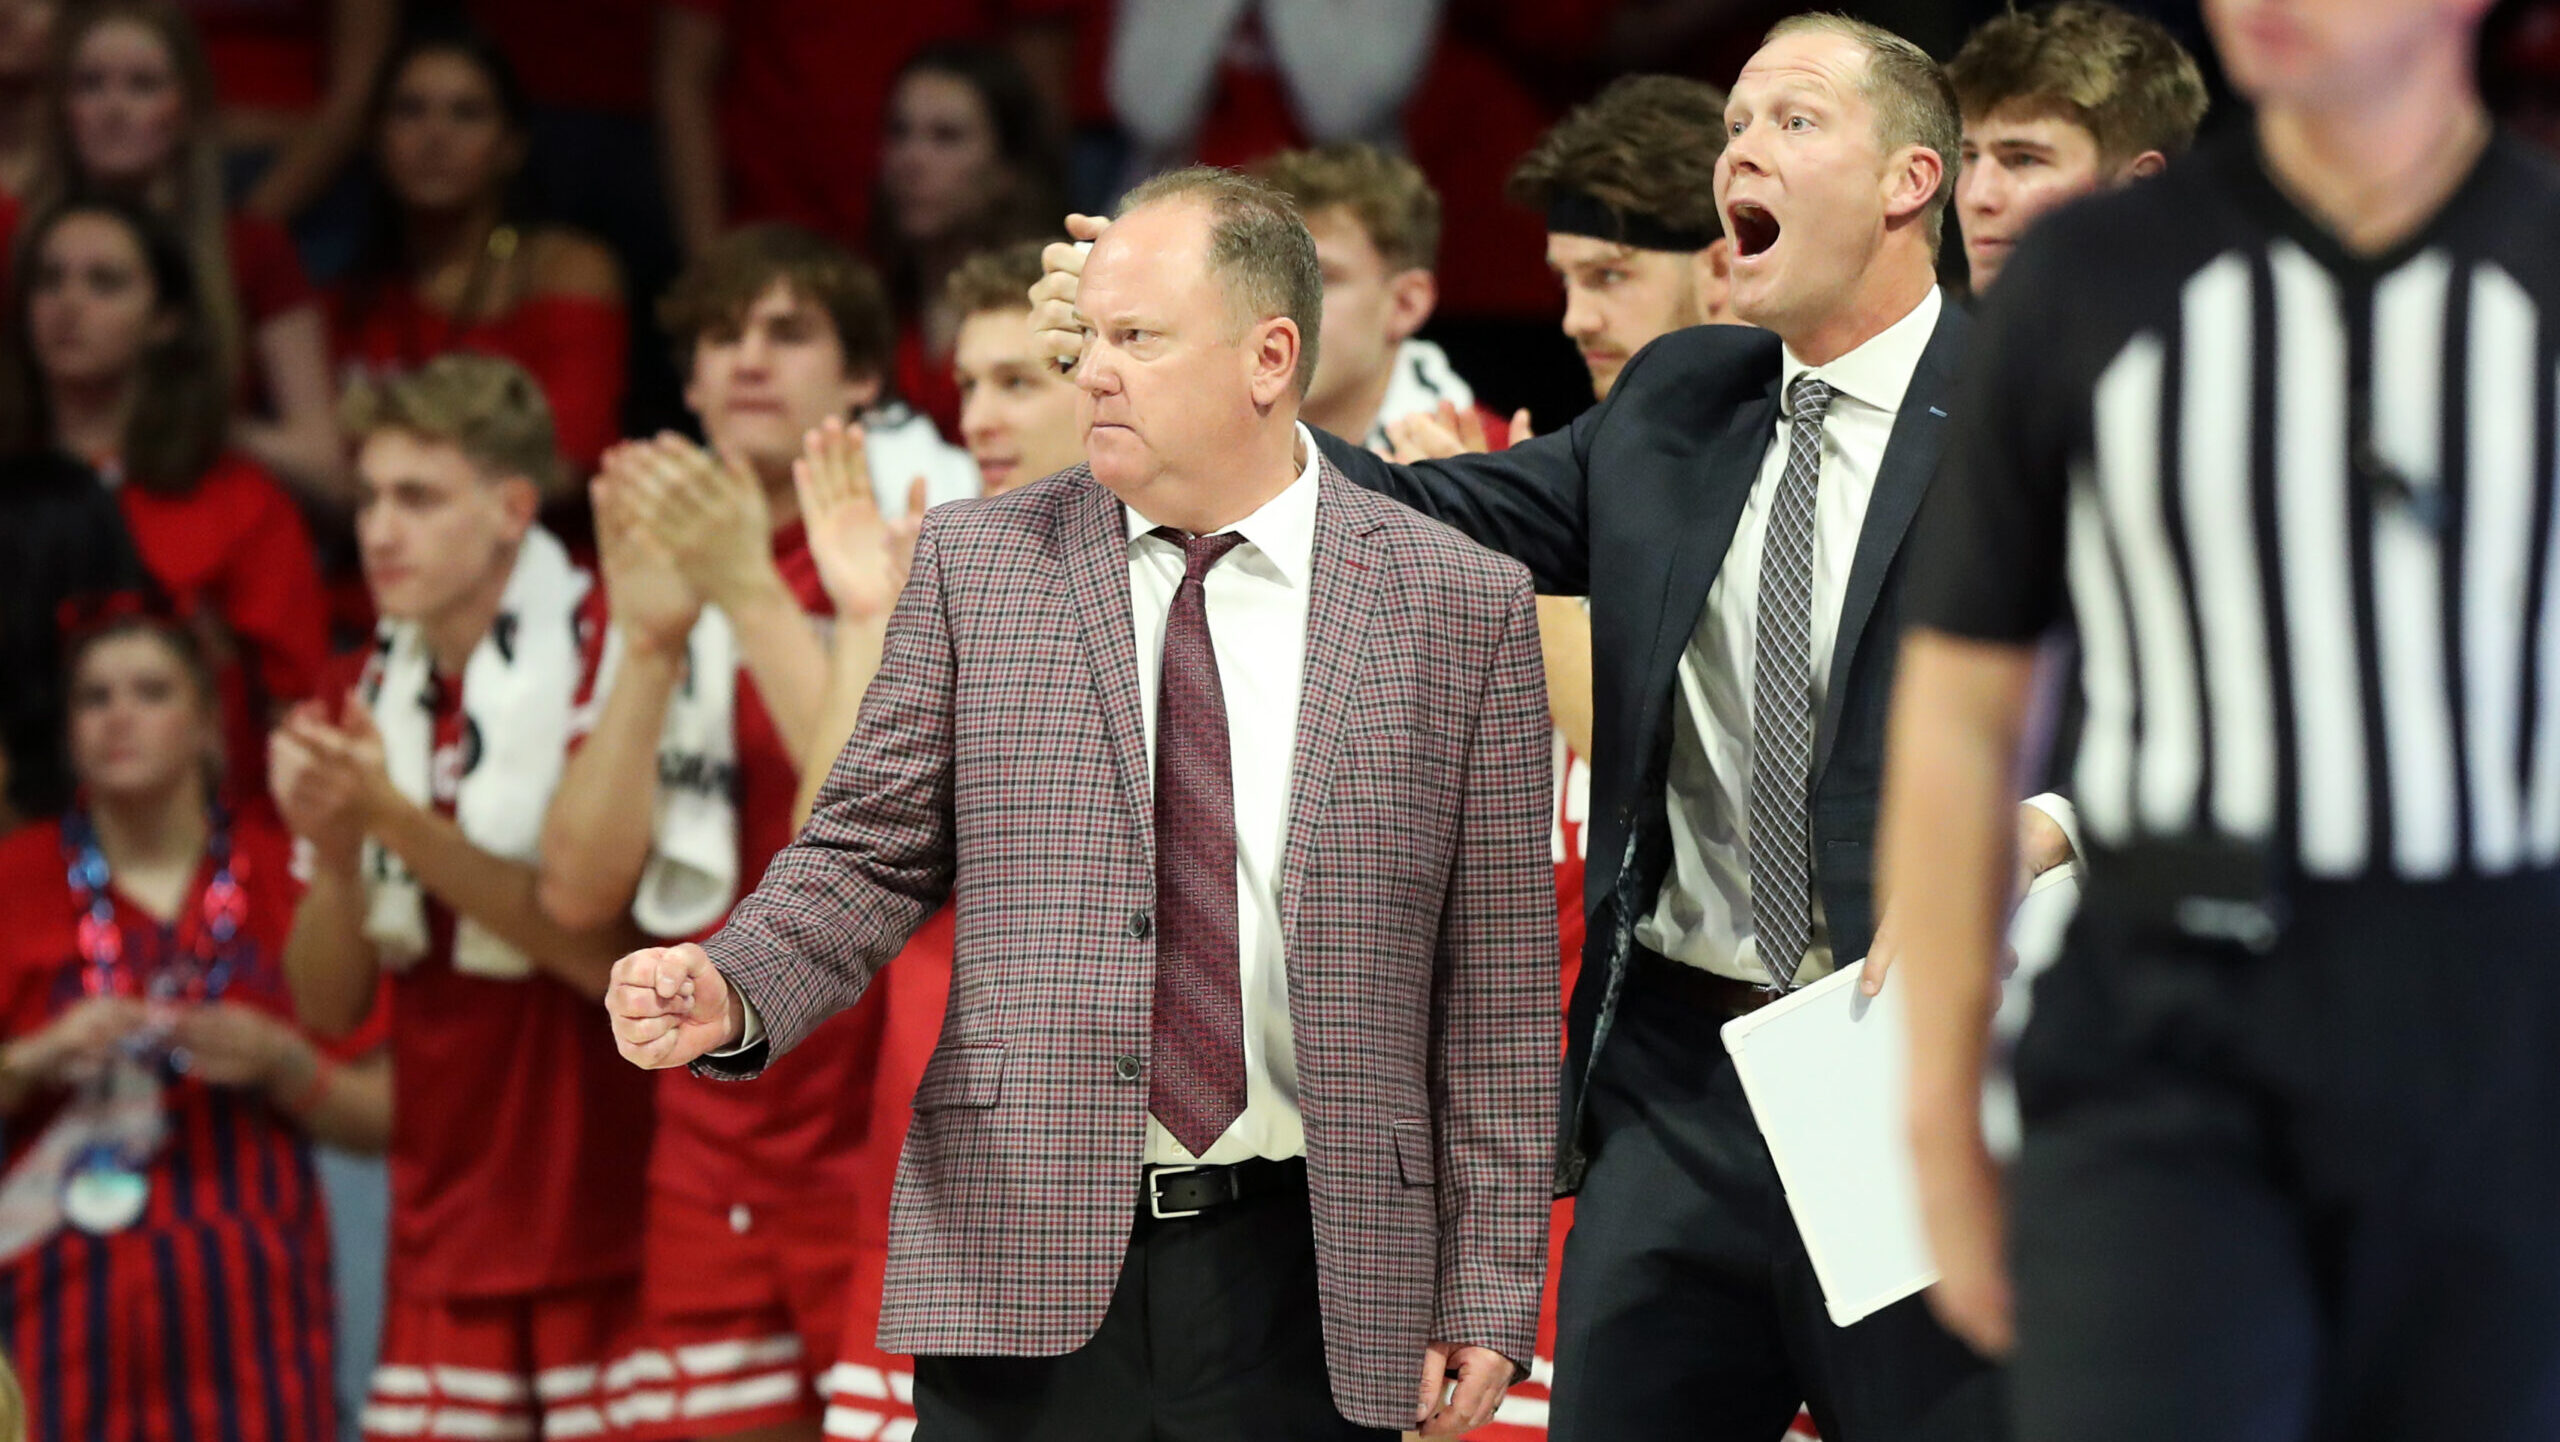 Wisconsin Basketball Seeks Top Recruiting Assistant Coach After Departure